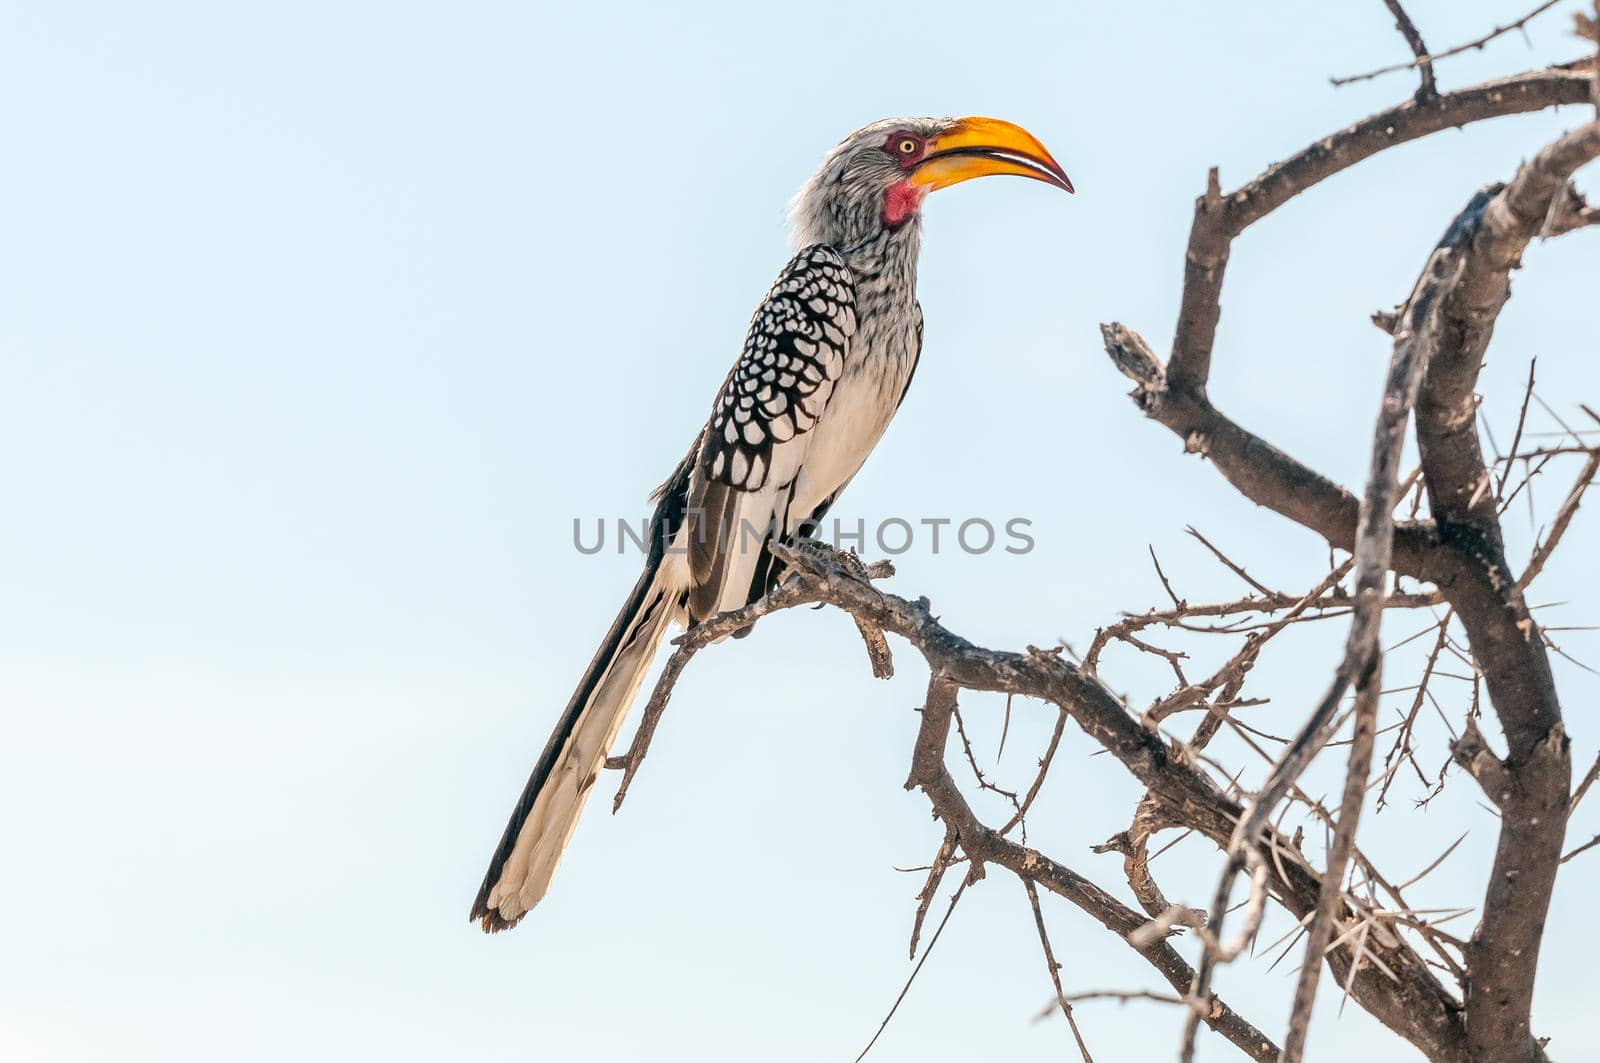 Southern Yellow-billed Hornbill on a branch in northern Namibia by dpreezg